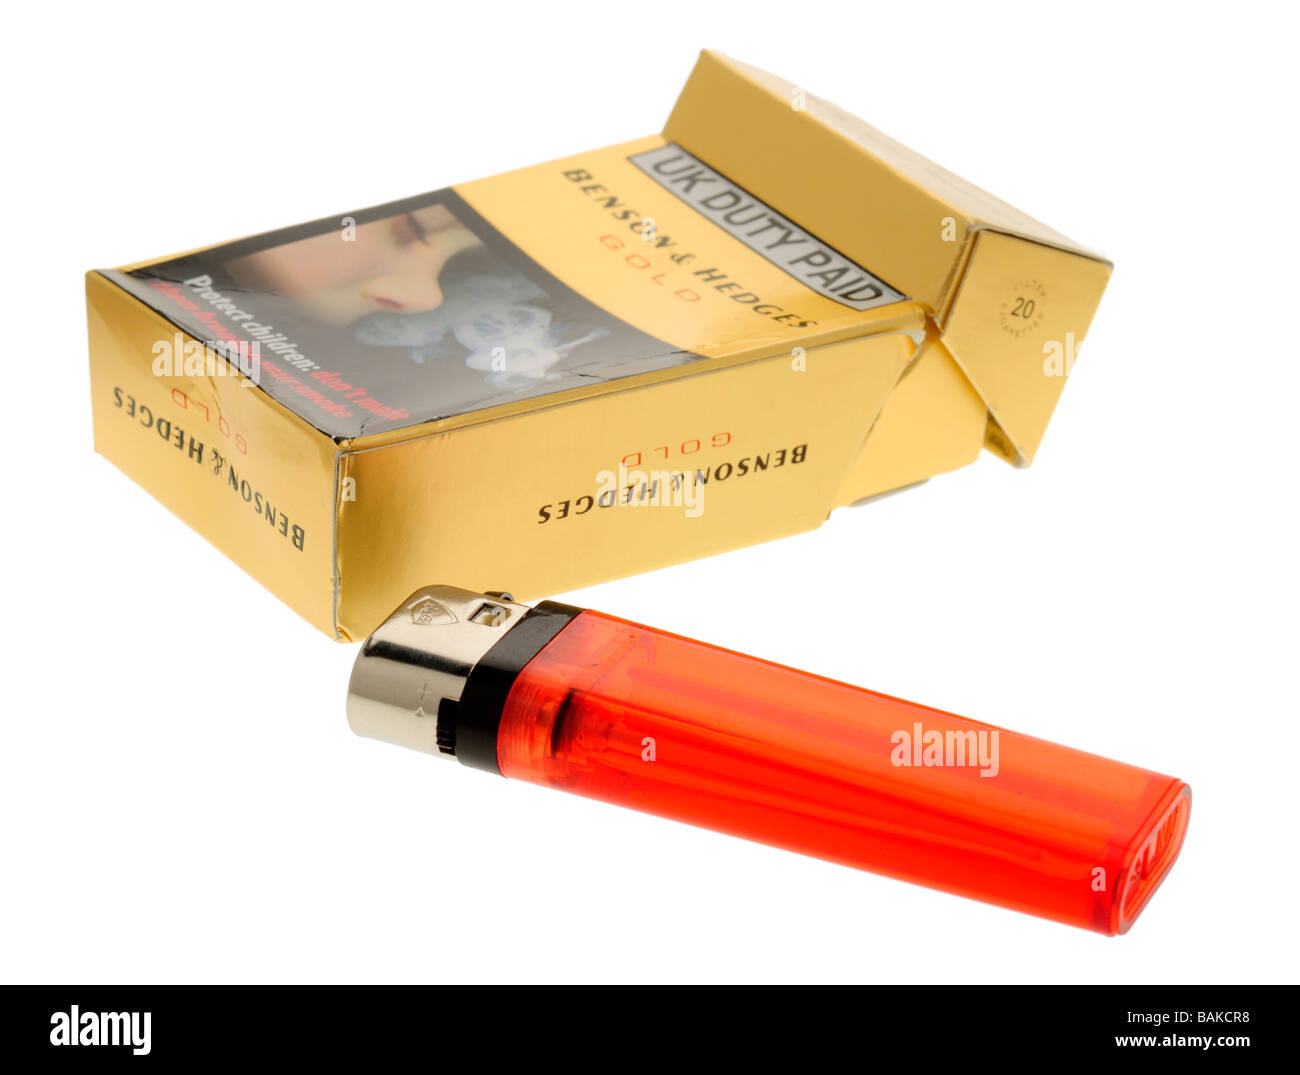 Håndfuld Landbrugs overtro Packet of 20 Benson Hedges Cigarettes with Disposable Lighter Stock Photo -  Alamy